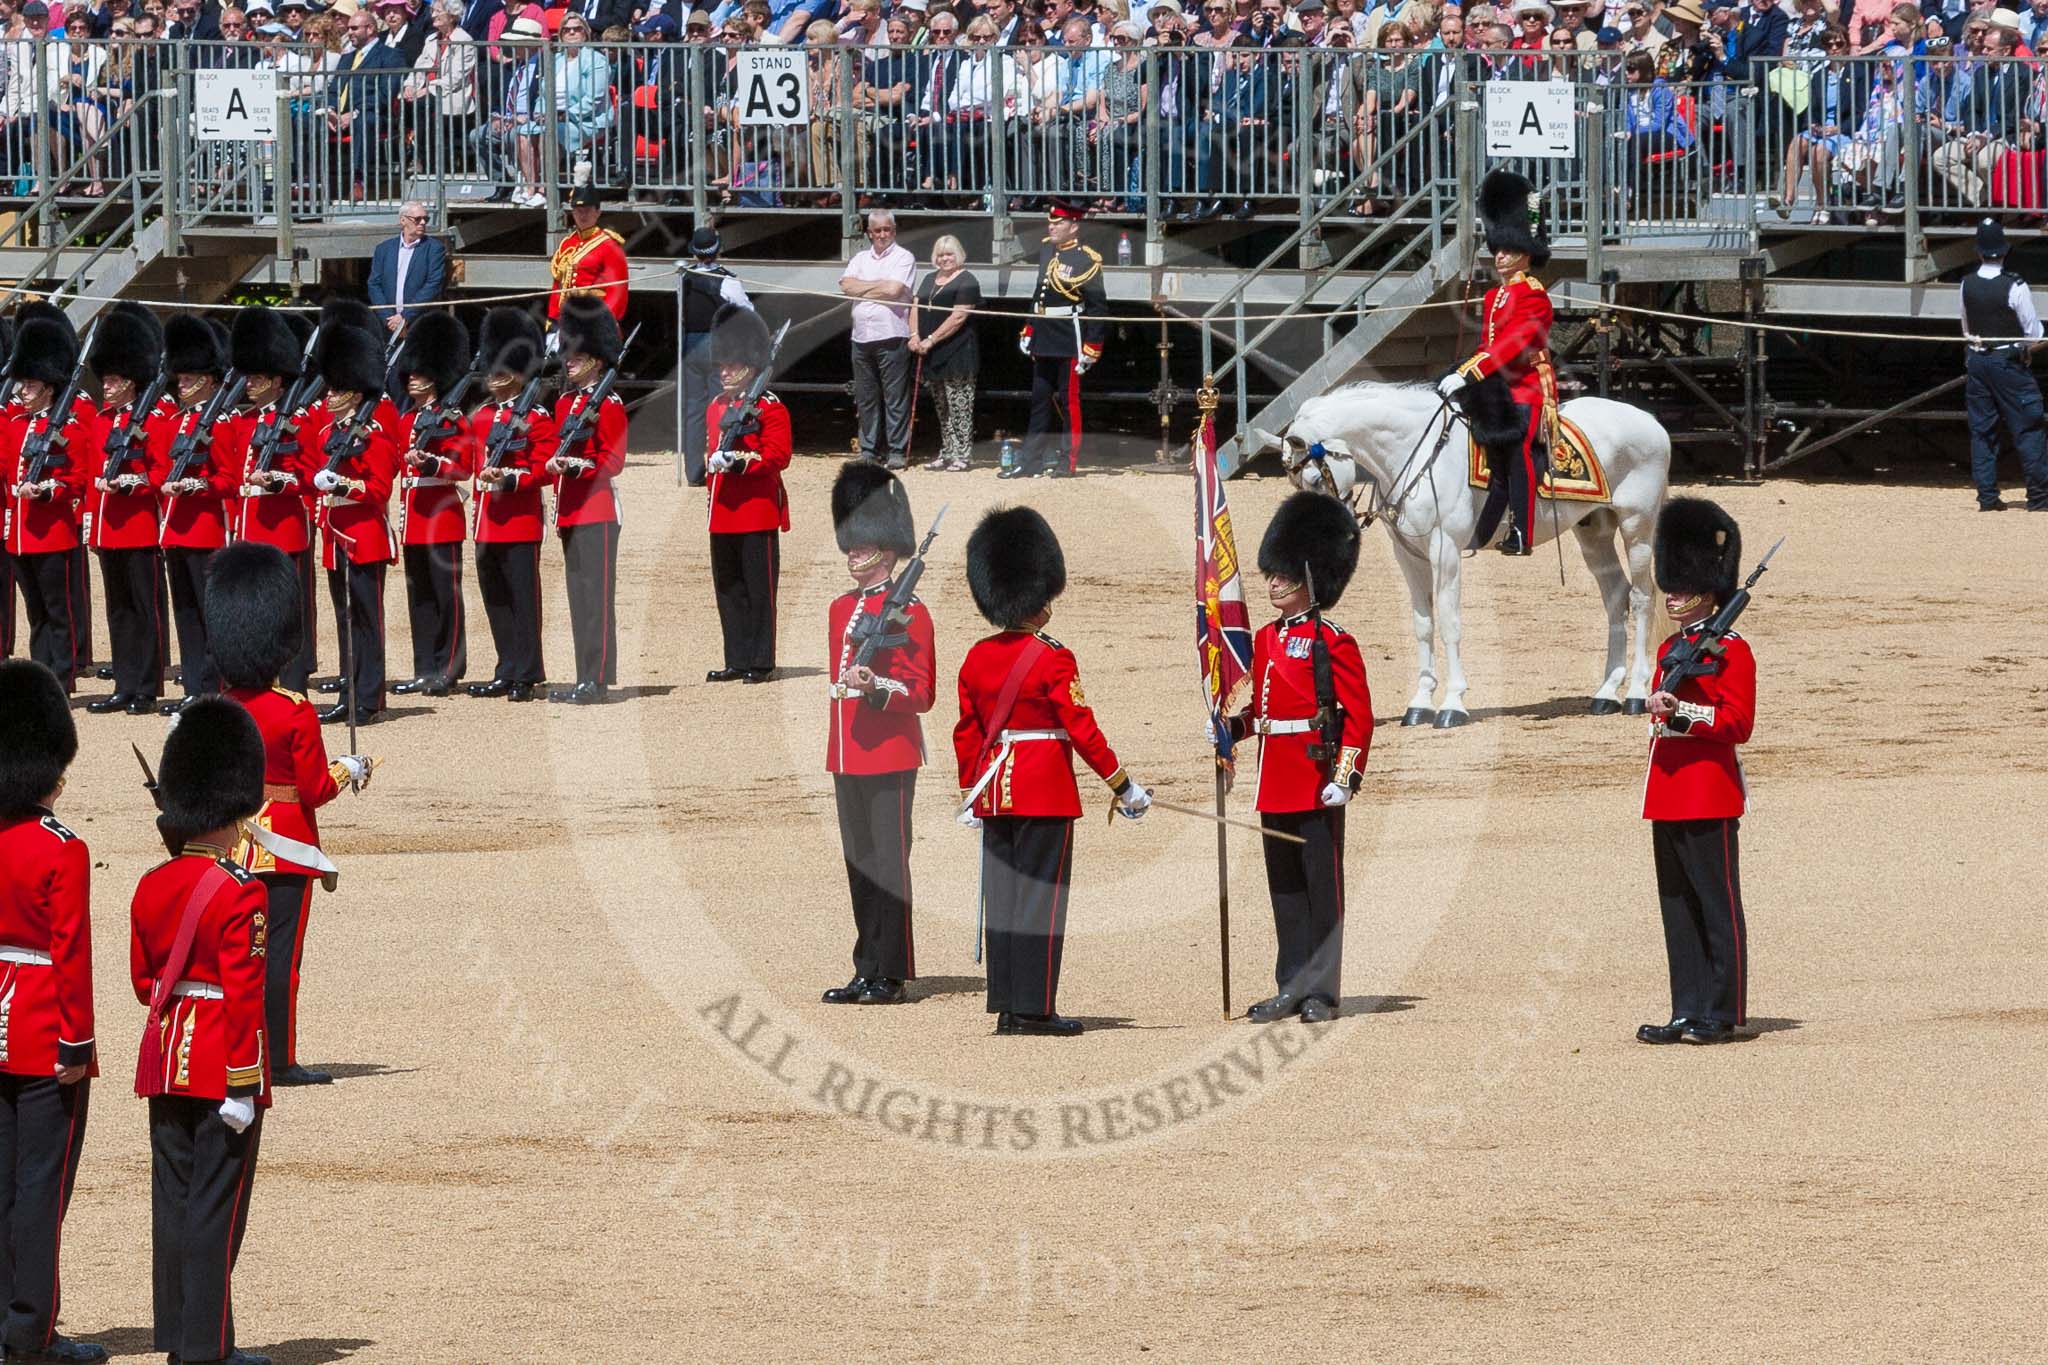 The Colonel's Review 2015.
Horse Guards Parade, Westminster,
London,

United Kingdom,
on 06 June 2015 at 11:19, image #305